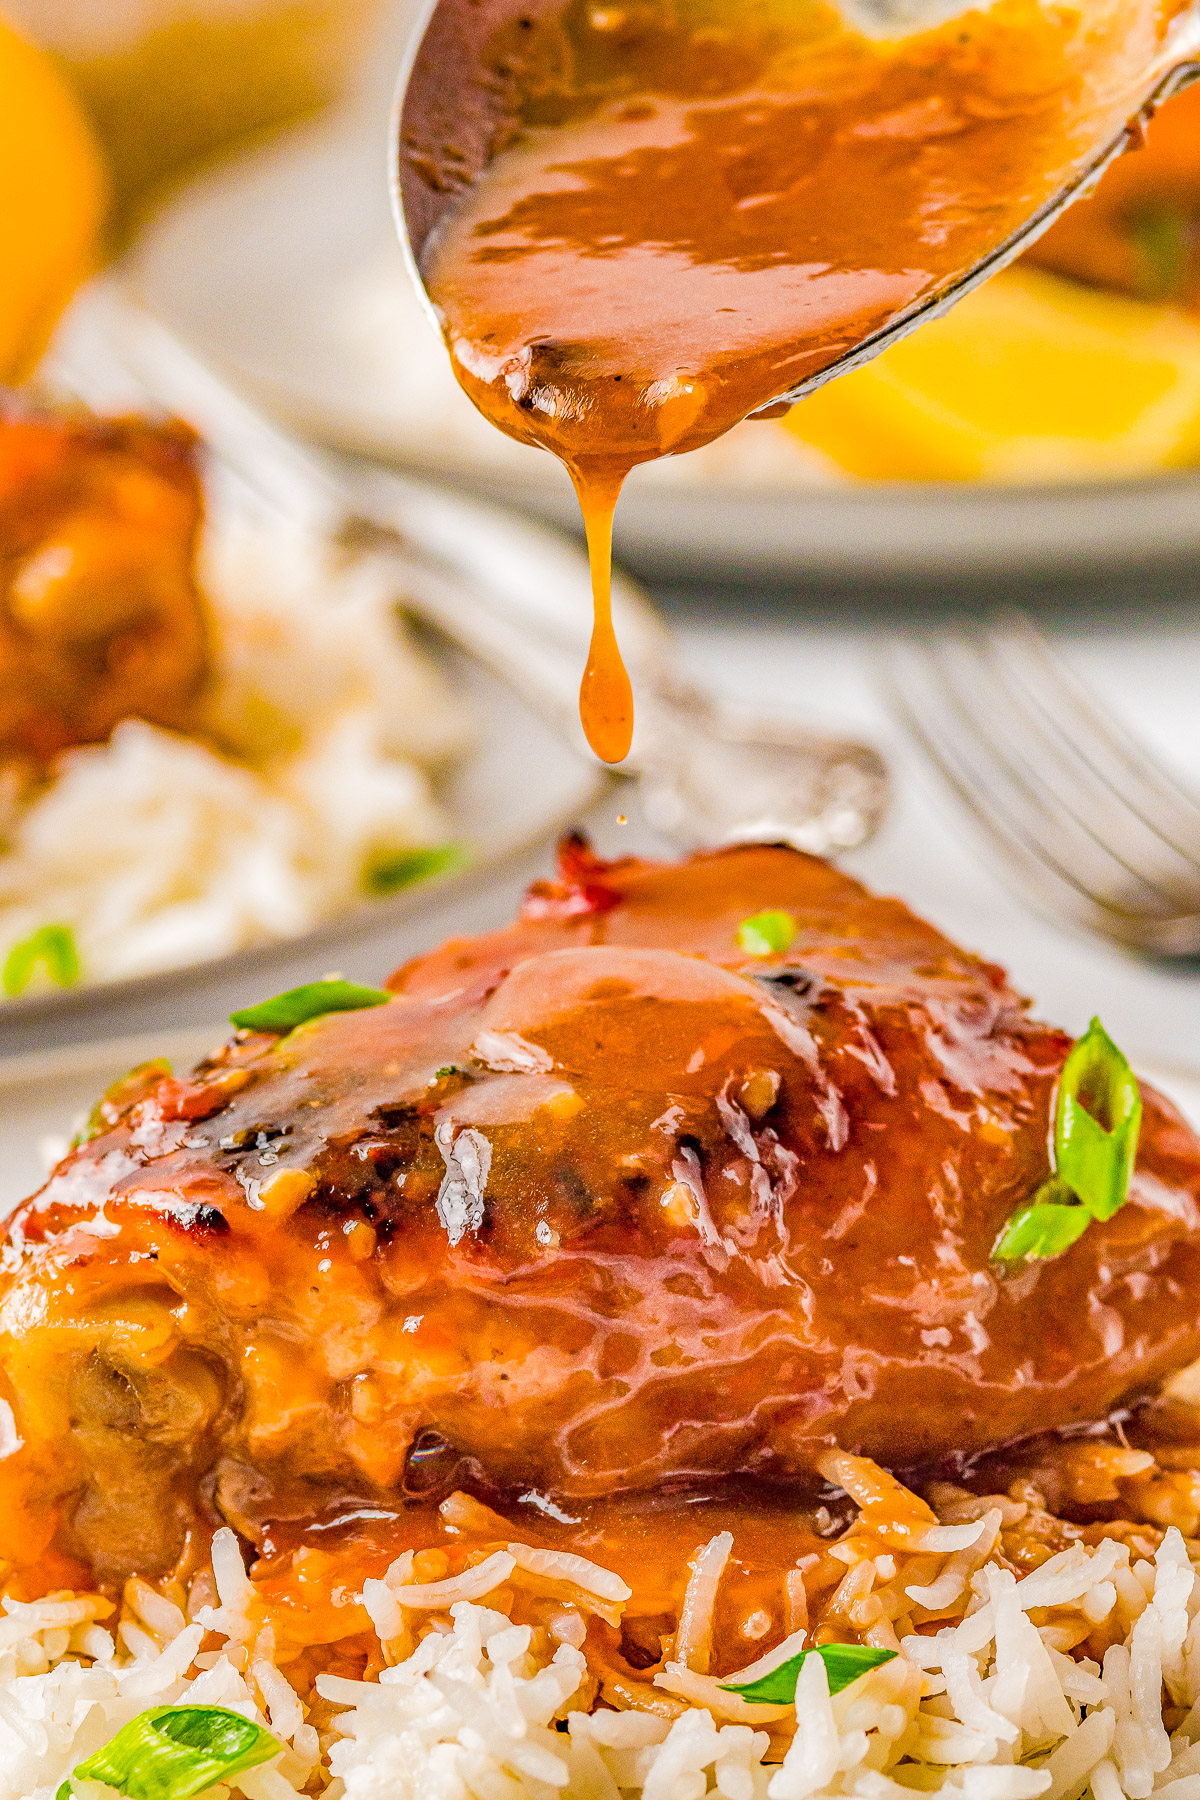 Honey Soy Baked Chicken Thighs - The chicken marinates in the most delectable mixture of soy sauce, honey, garlic, ginger, and more. The resulting baked chicken is SO tender, juicy, moist, and loaded with Asian-inspired flavors! Even better, this is a one-pan, EASY recipe the whole family will adore!